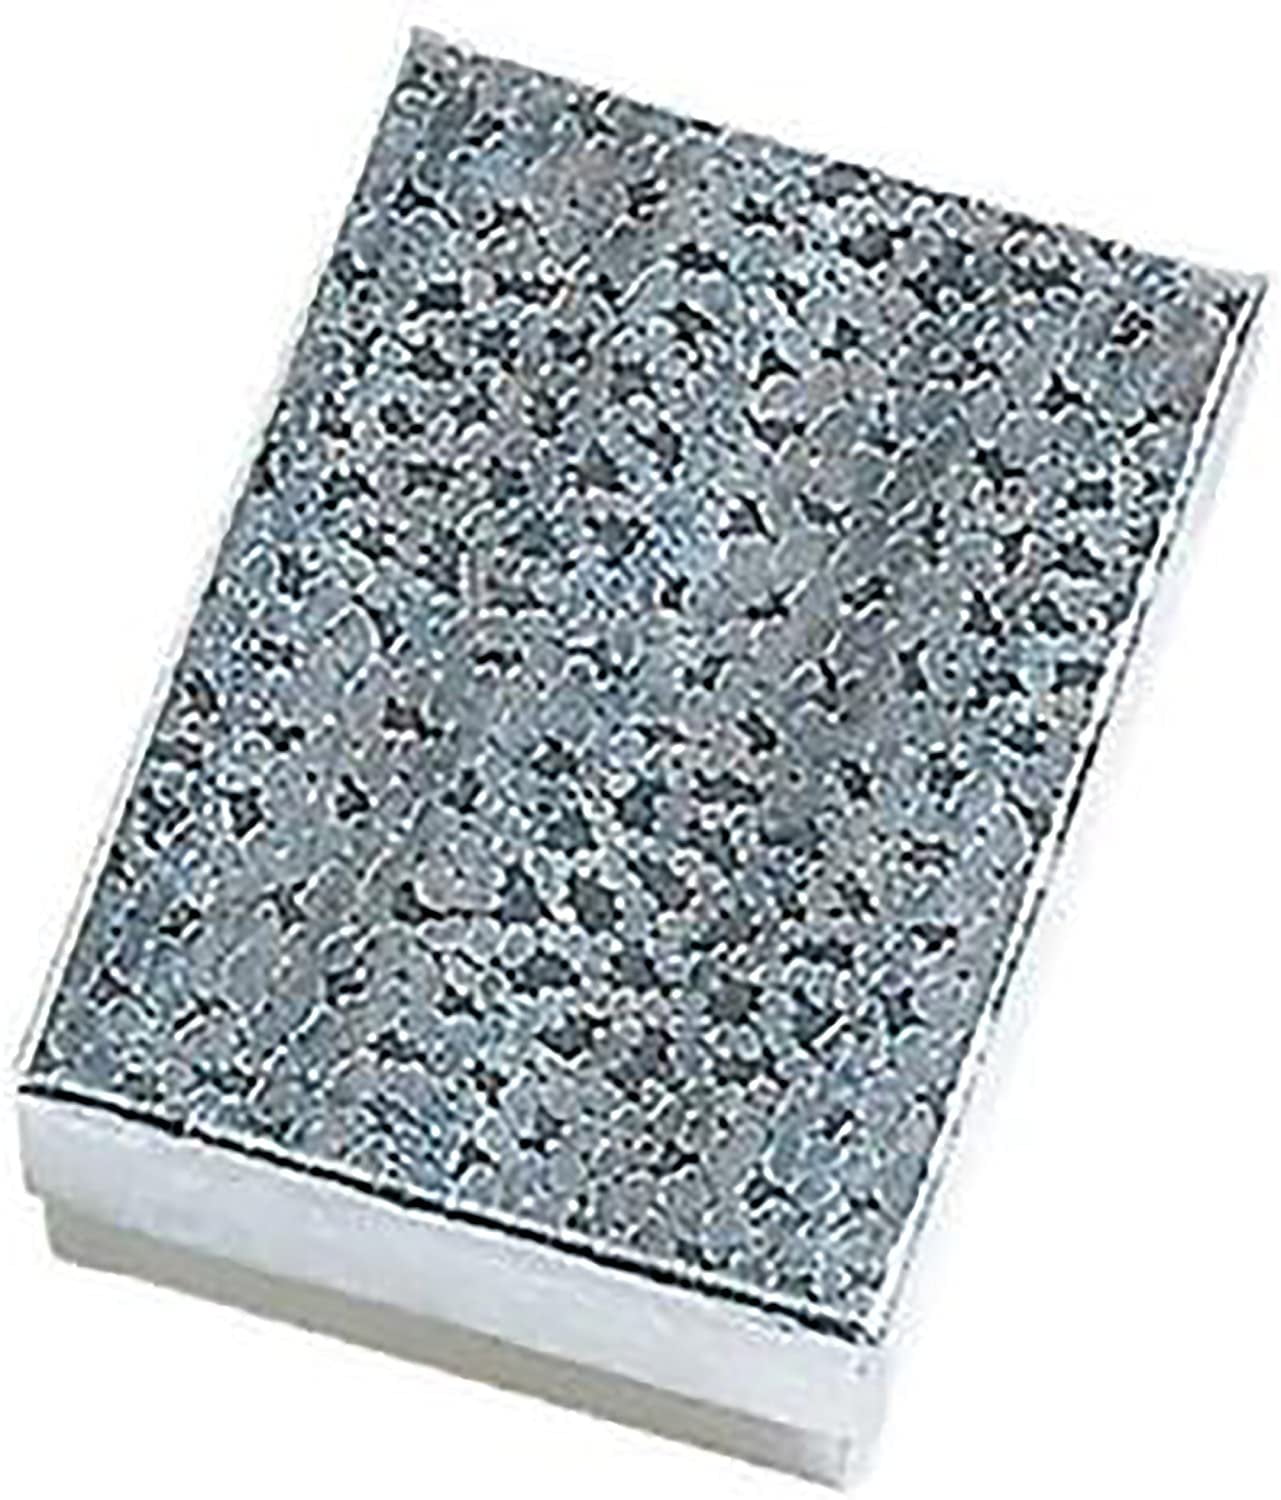 100 Silver Foil Cotton Filled Jewelry Gift Boxes Charm Ring Box 3 1/4" X 2 1/4 